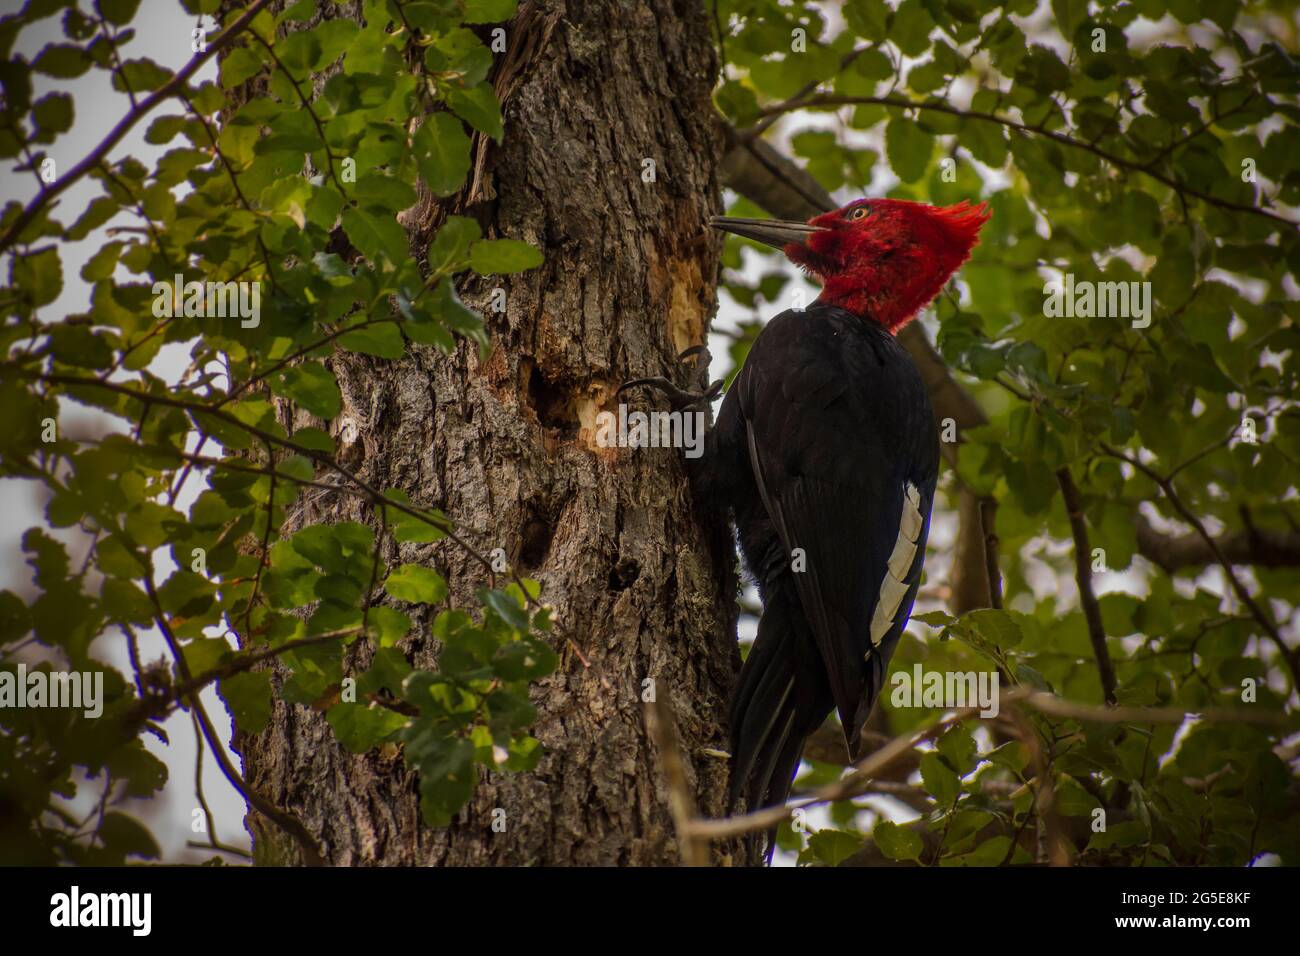 Giant patagonian woodpecker, bird only found in patagonia. Photo taken in Los Alerces National Park. Campephilus magellanicus. Stock Photo